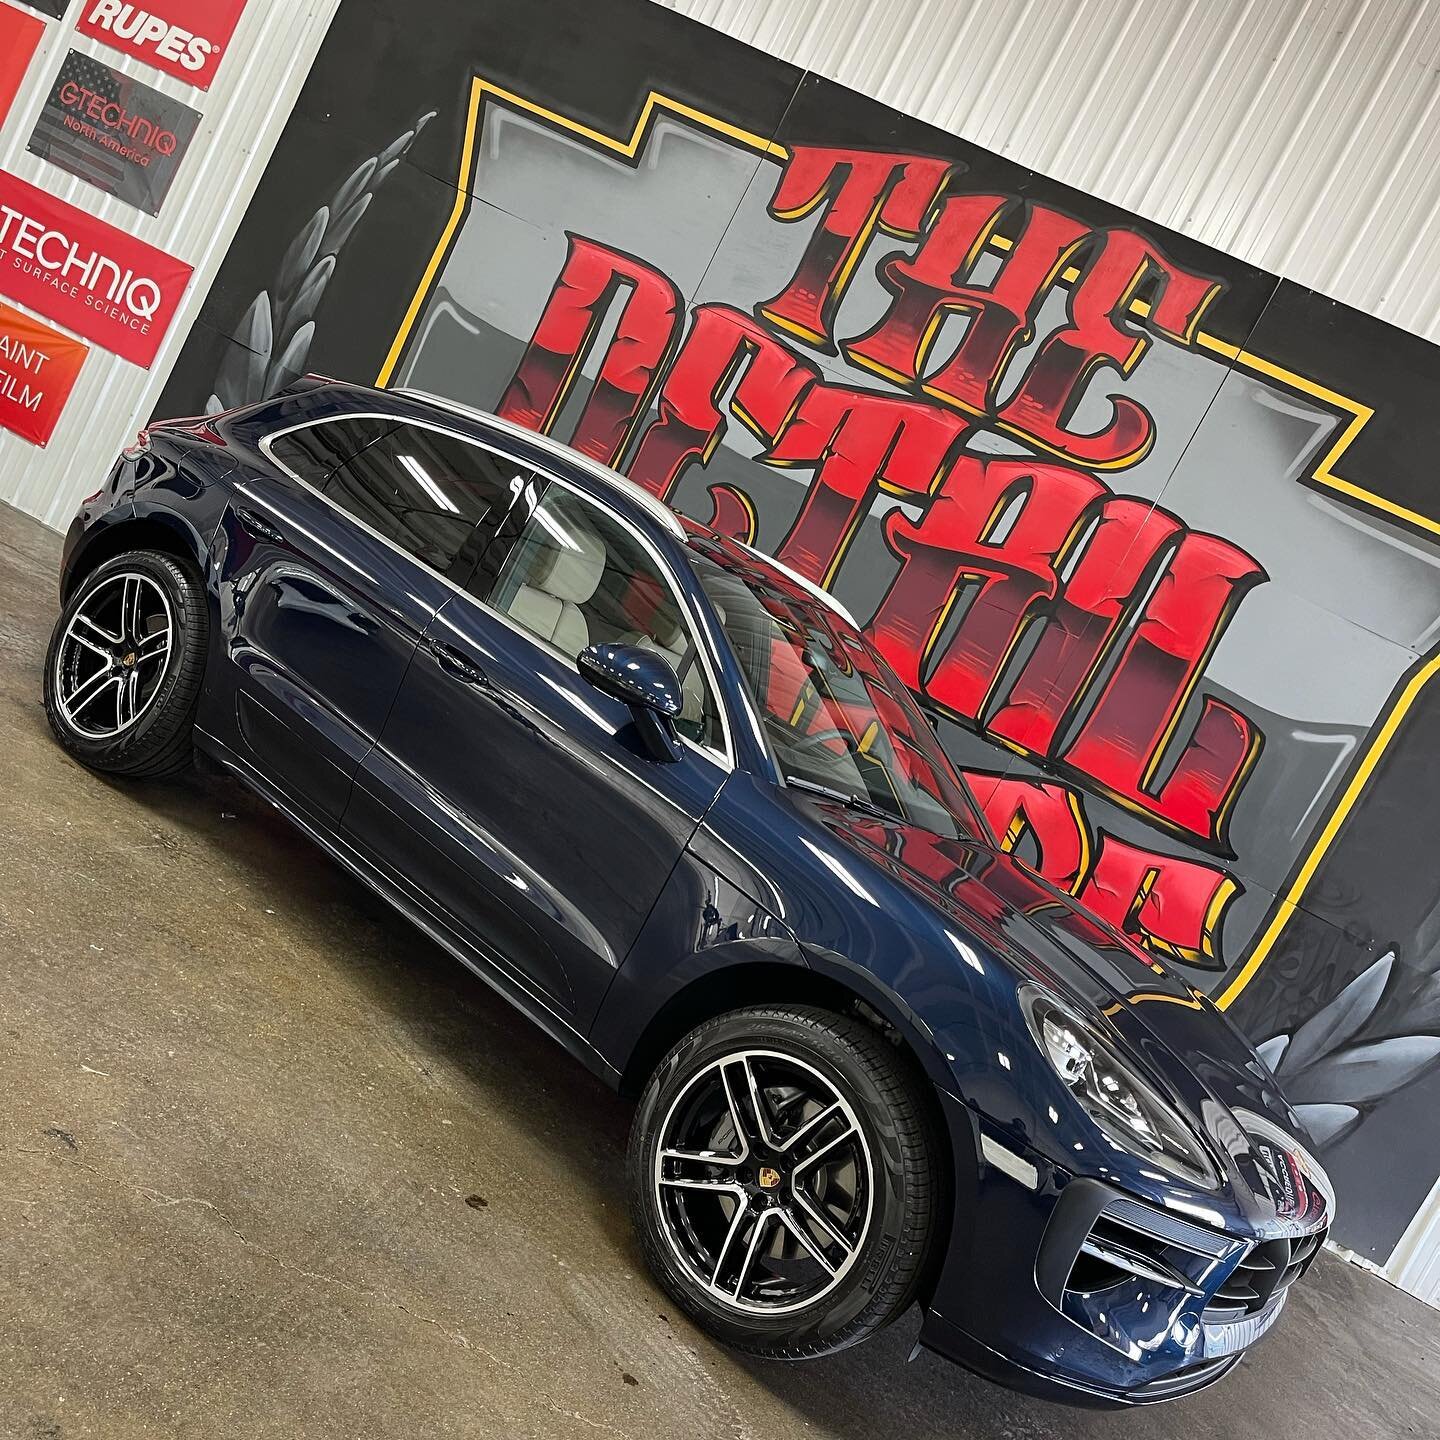 We have Porsche Macan S fresh off the boat and delivered to us for the best in protection and ease of maintenance with Gtechniq Crystal Serum Ultra and the rest of the Gtechniq line up. #westmichigan #springlake #grandhaven #muskegon #detail #details